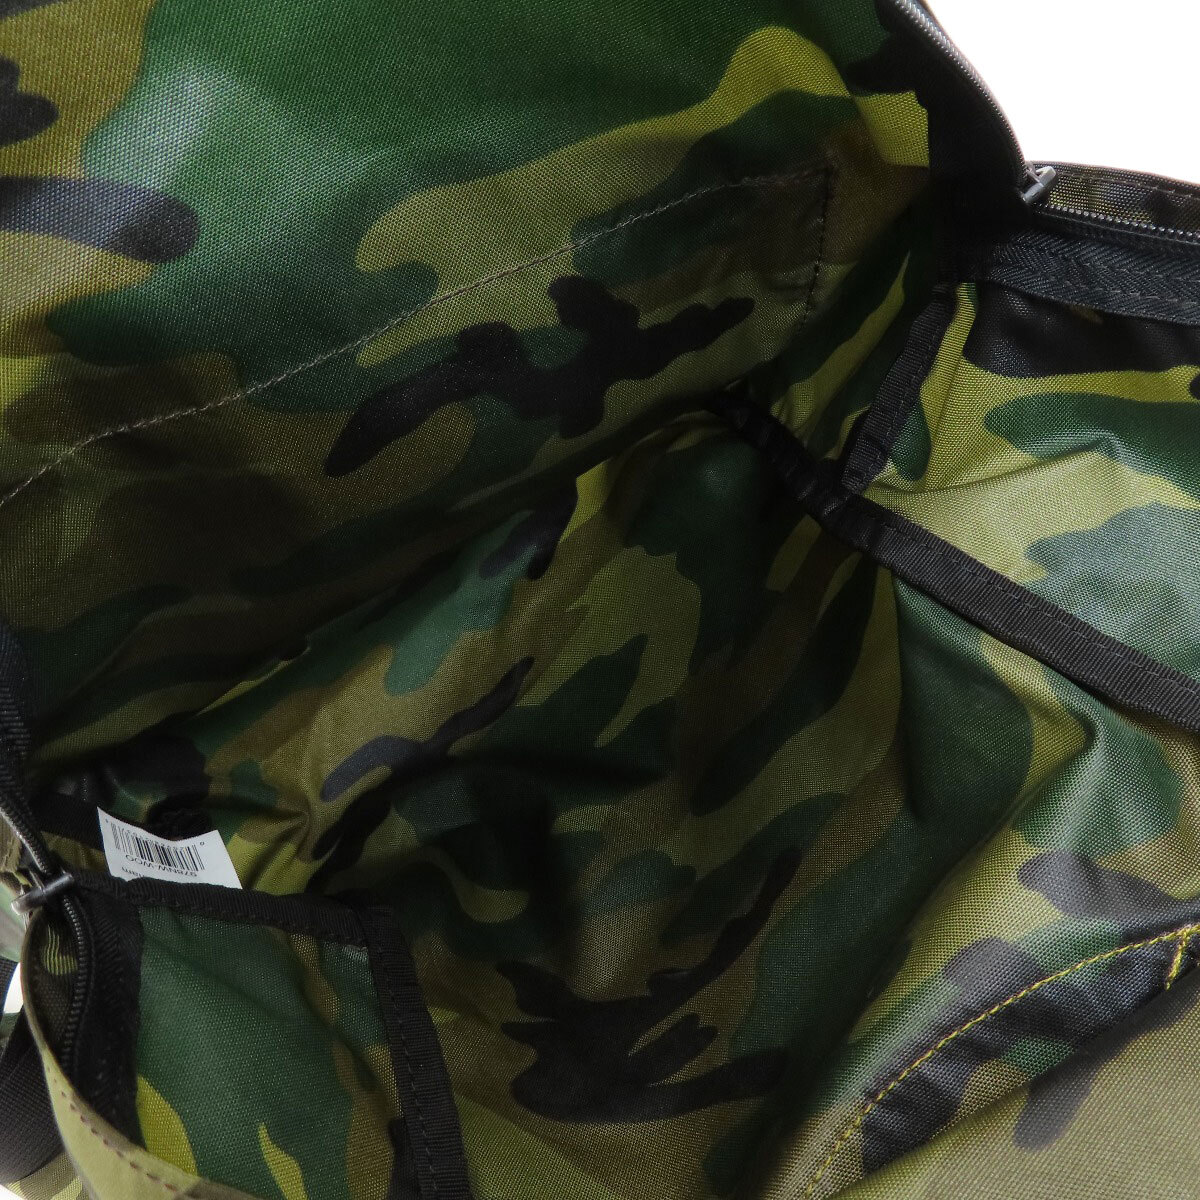 Herve Chapelier L be* car plie camouflage -ju pattern rucksack * Day Pack nylon material lady's used 